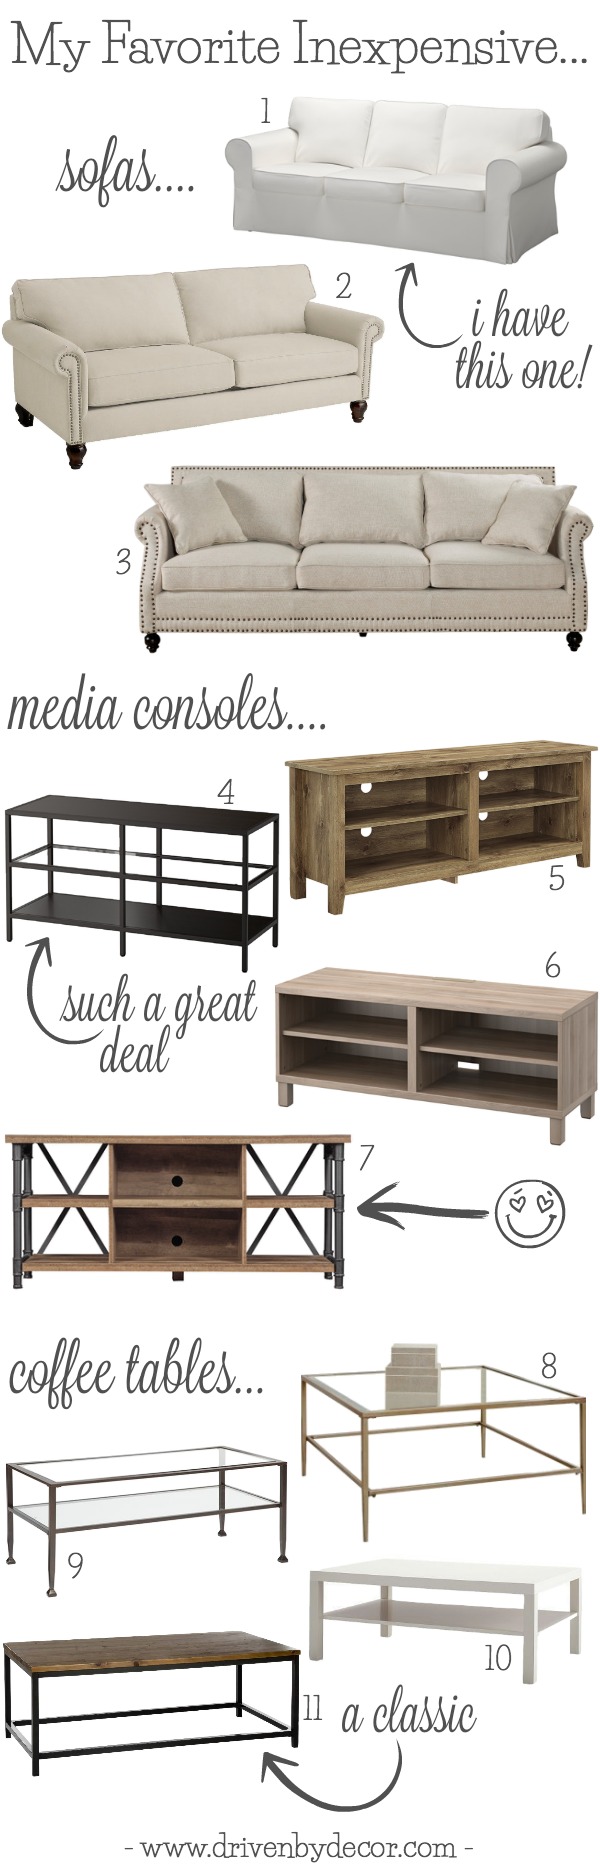 The best inexpensive, sofas, media consoles, and coffee tables!